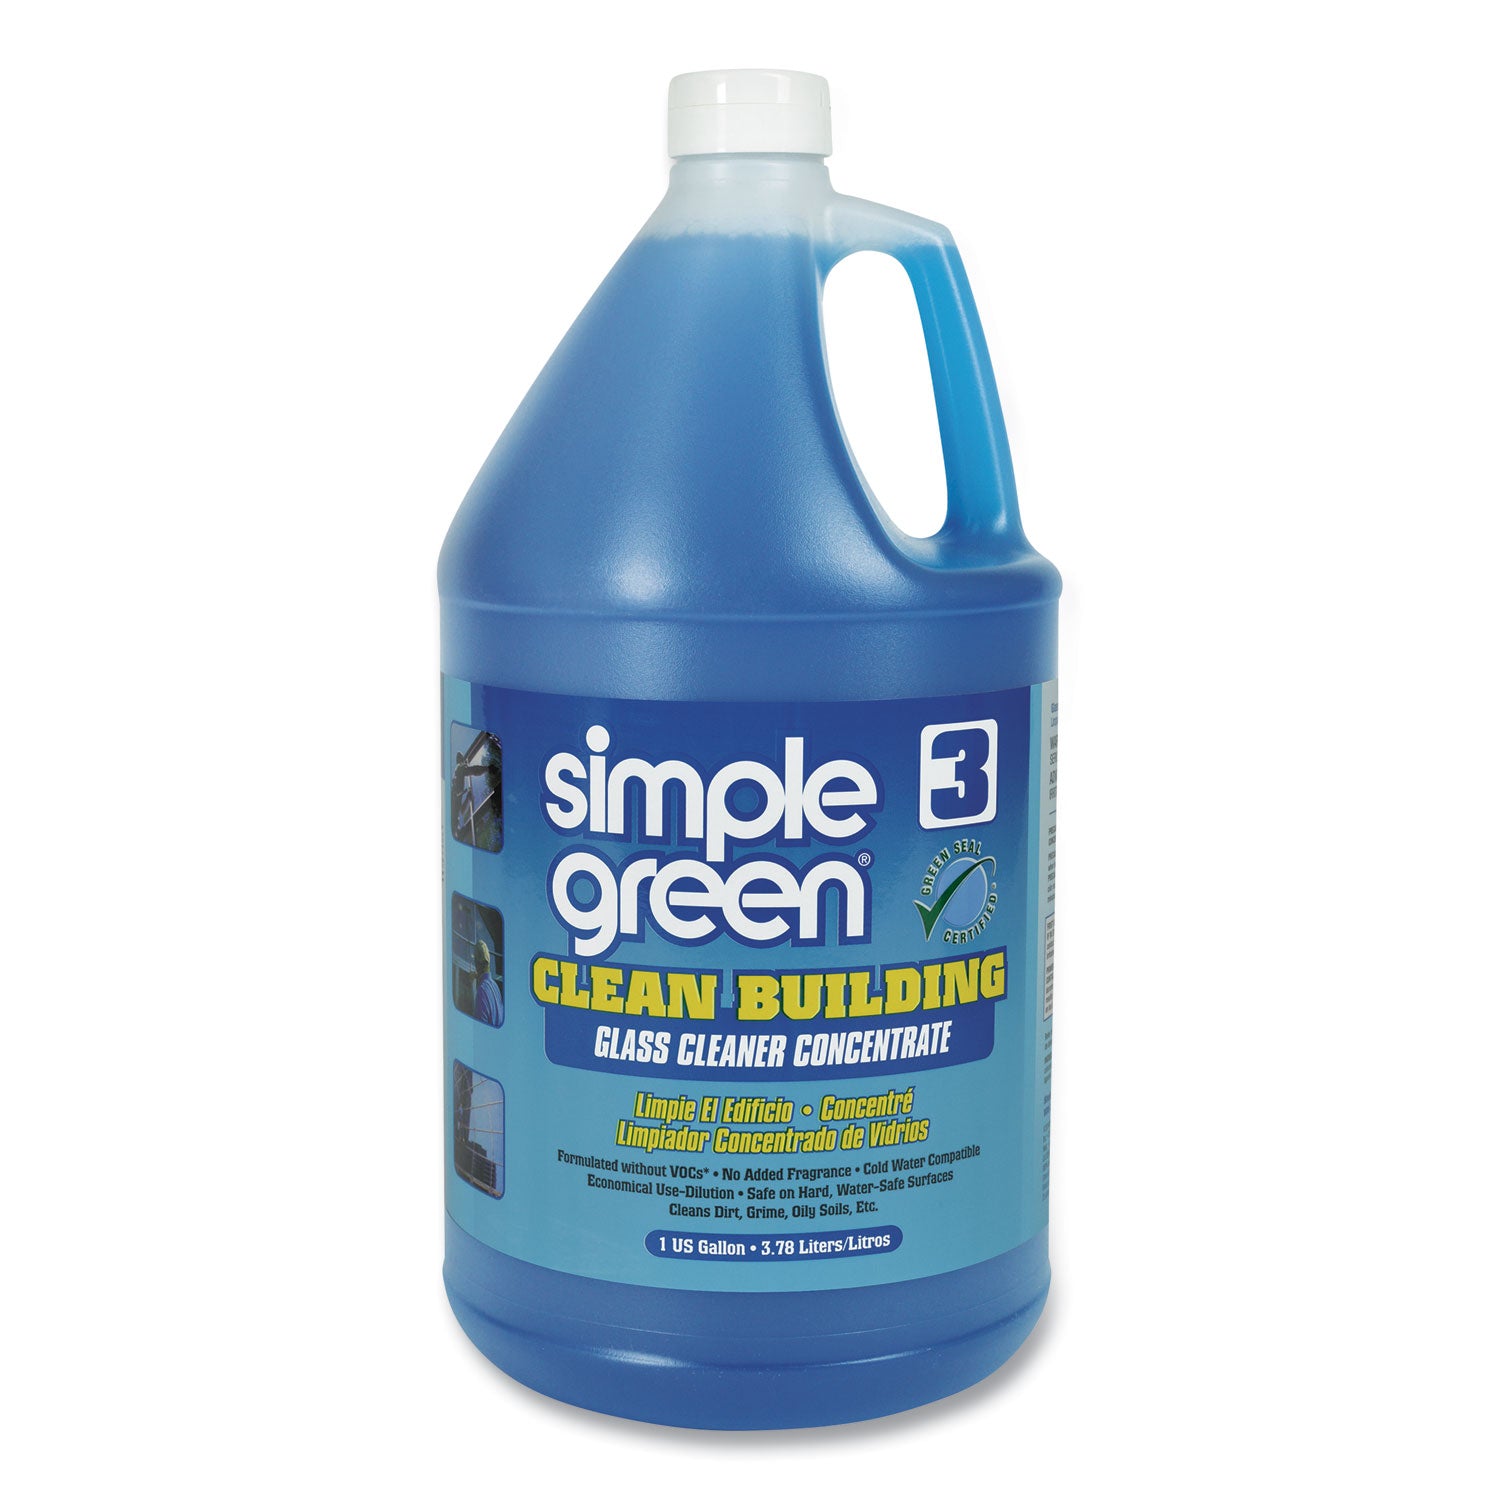 clean-building-glass-cleaner-concentrate-unscented-1gal-bottle_smp11301 - 1